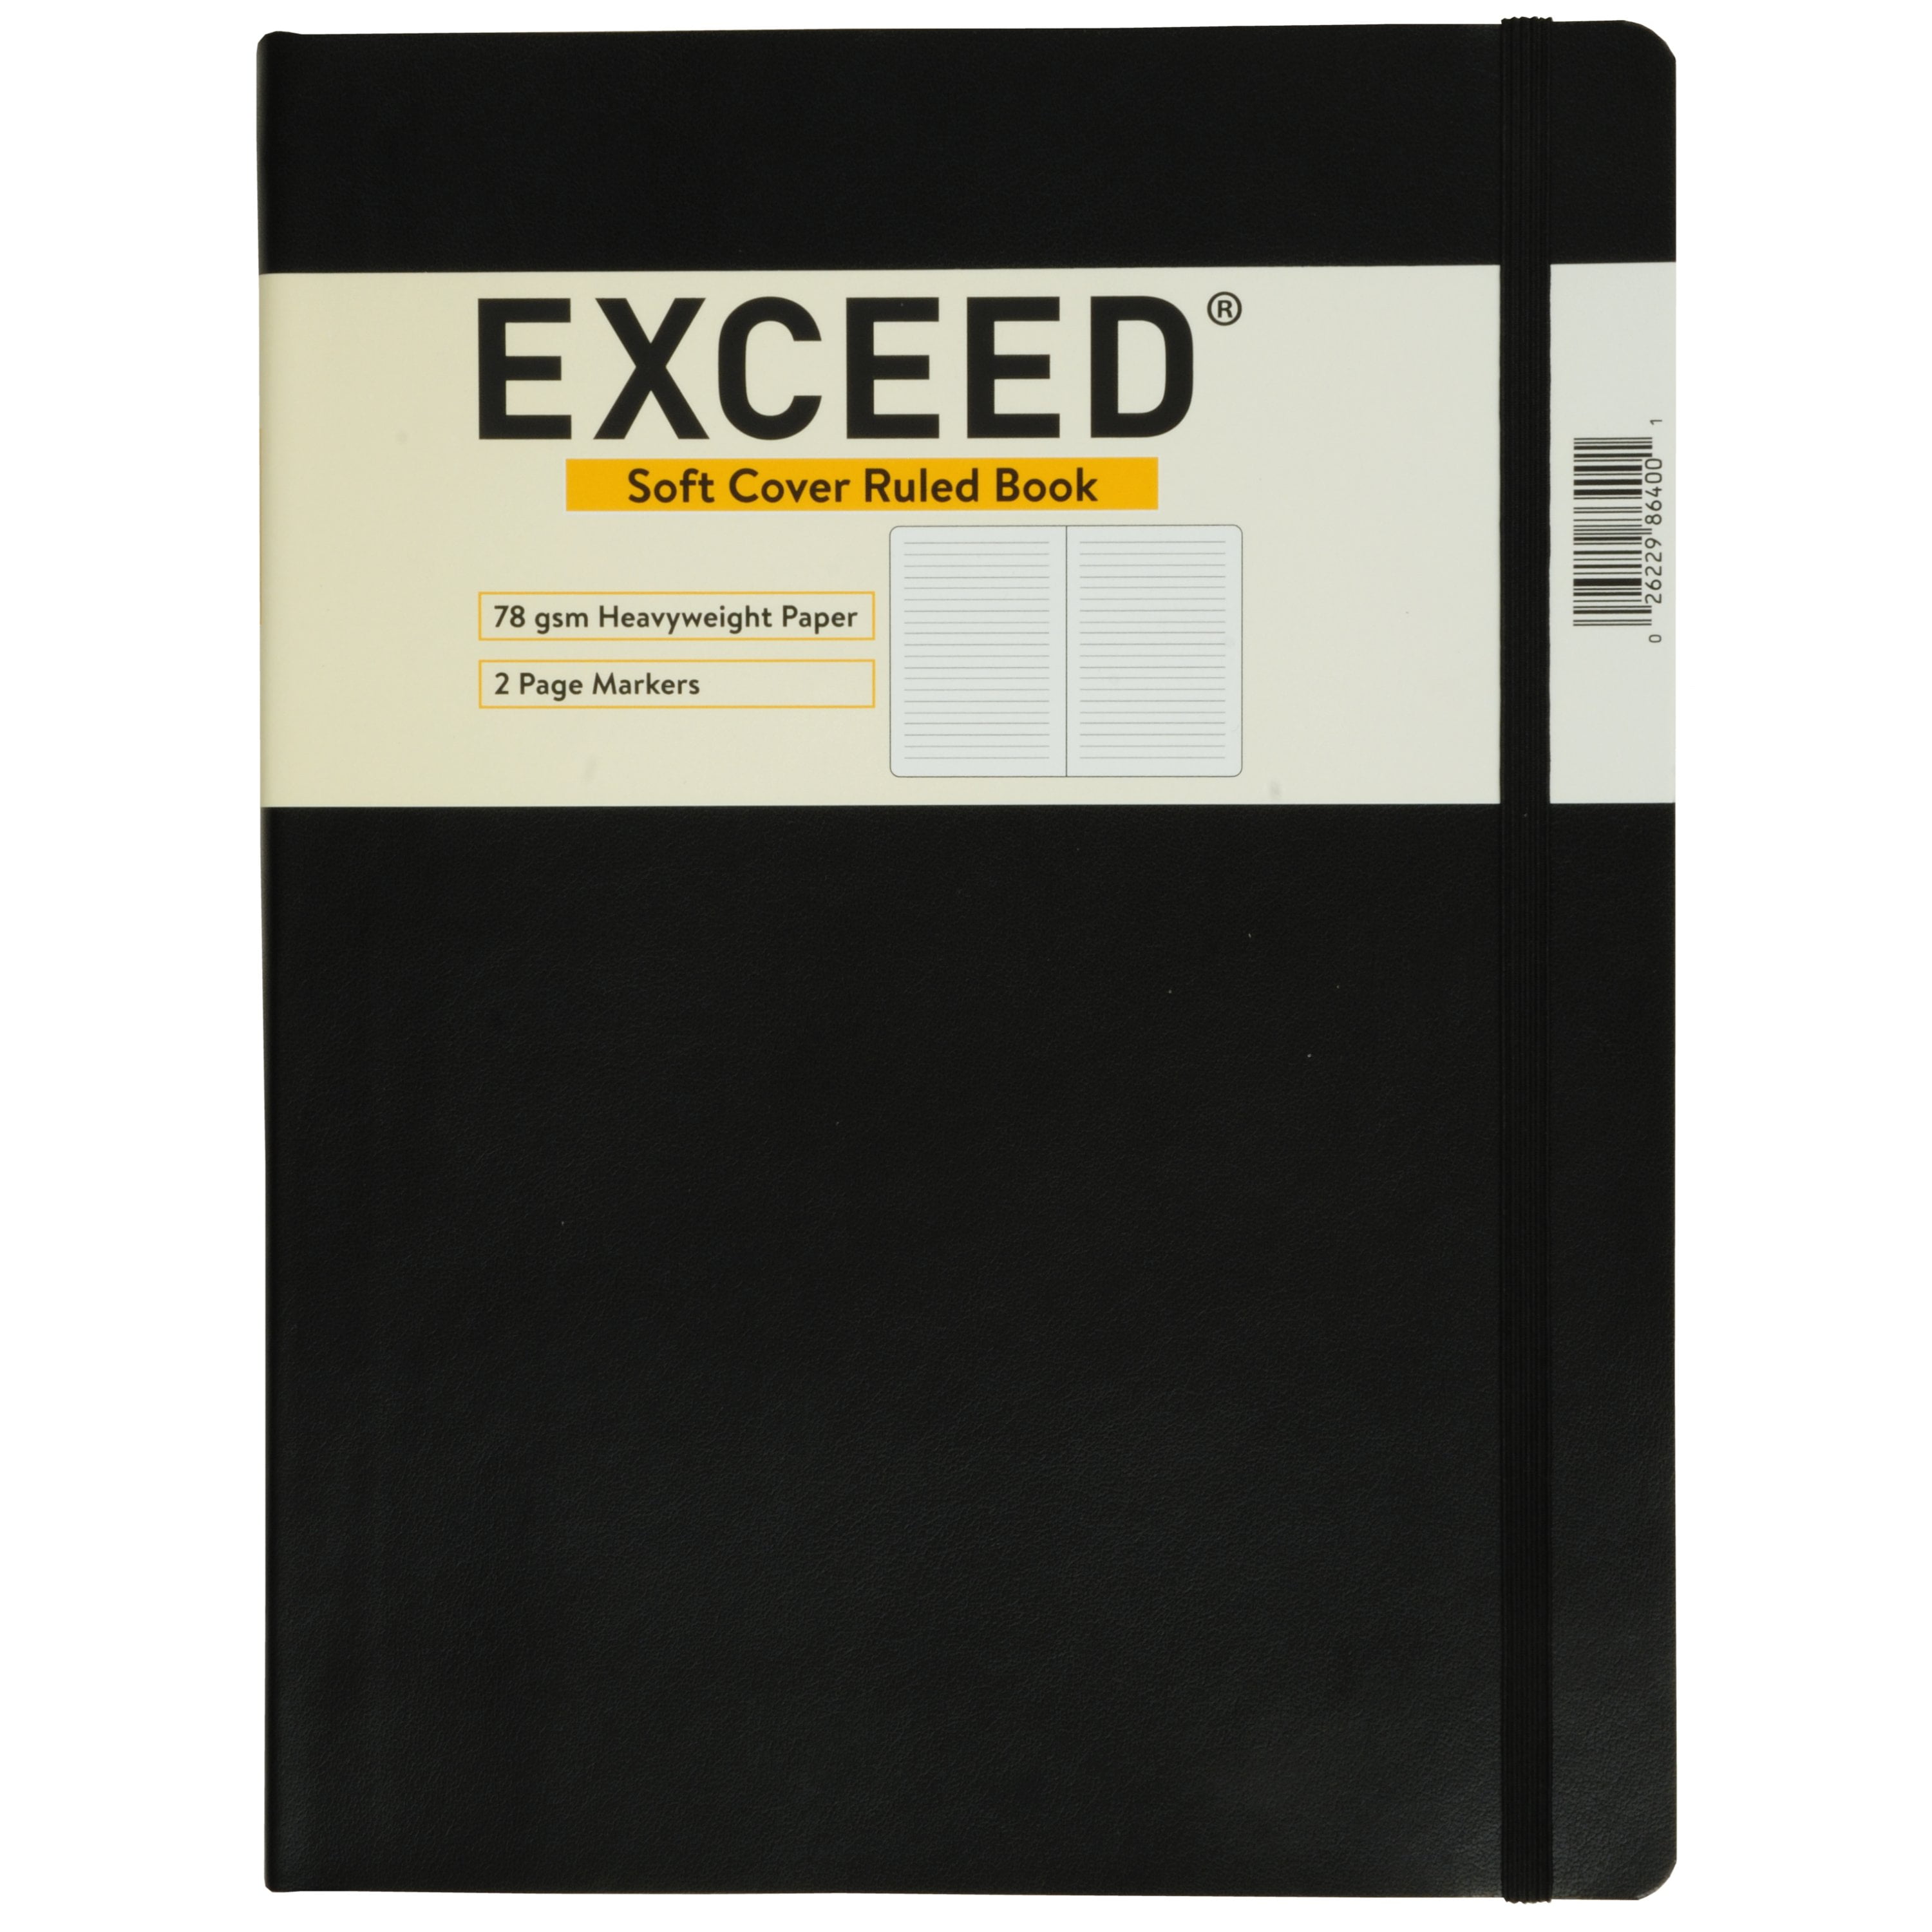 Black Paper Notebook: 120 Pages, Lined Journal / Notebook With Black Pages,  Large 8.5 X 11 Inches